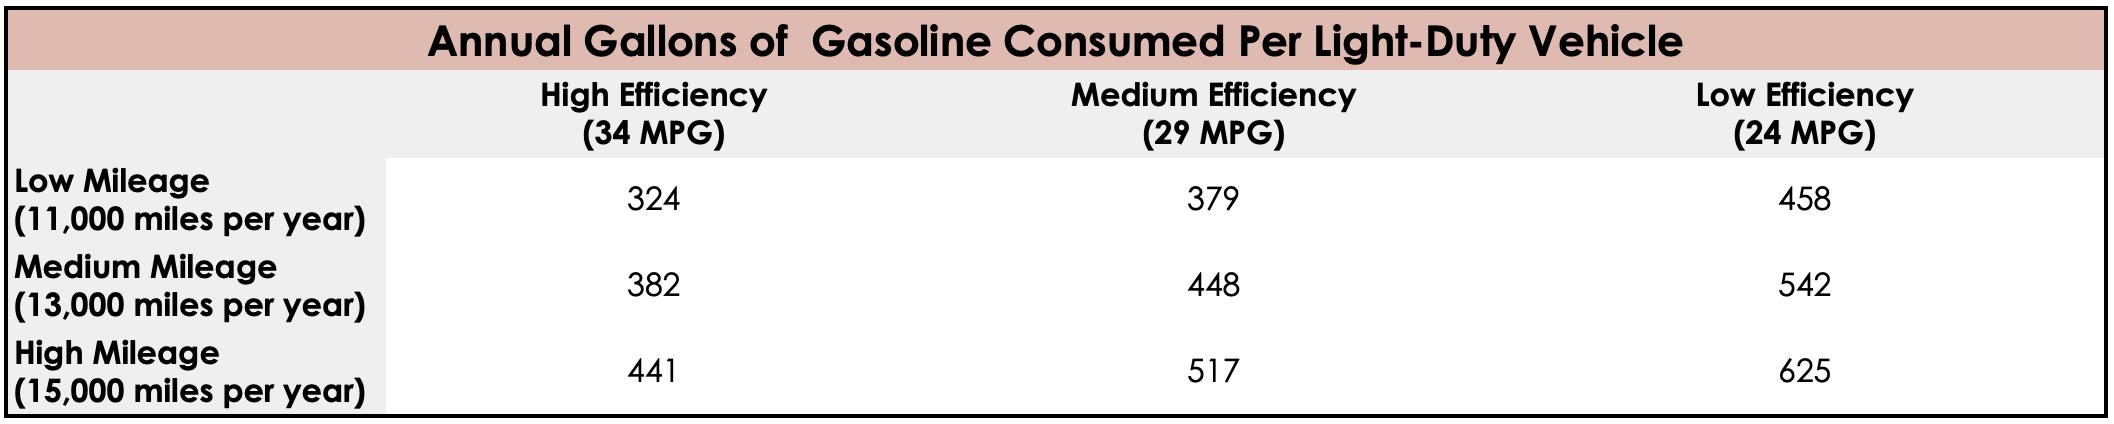 Table showing the annual gasoline consumed per ICE vehicle in this analysis.